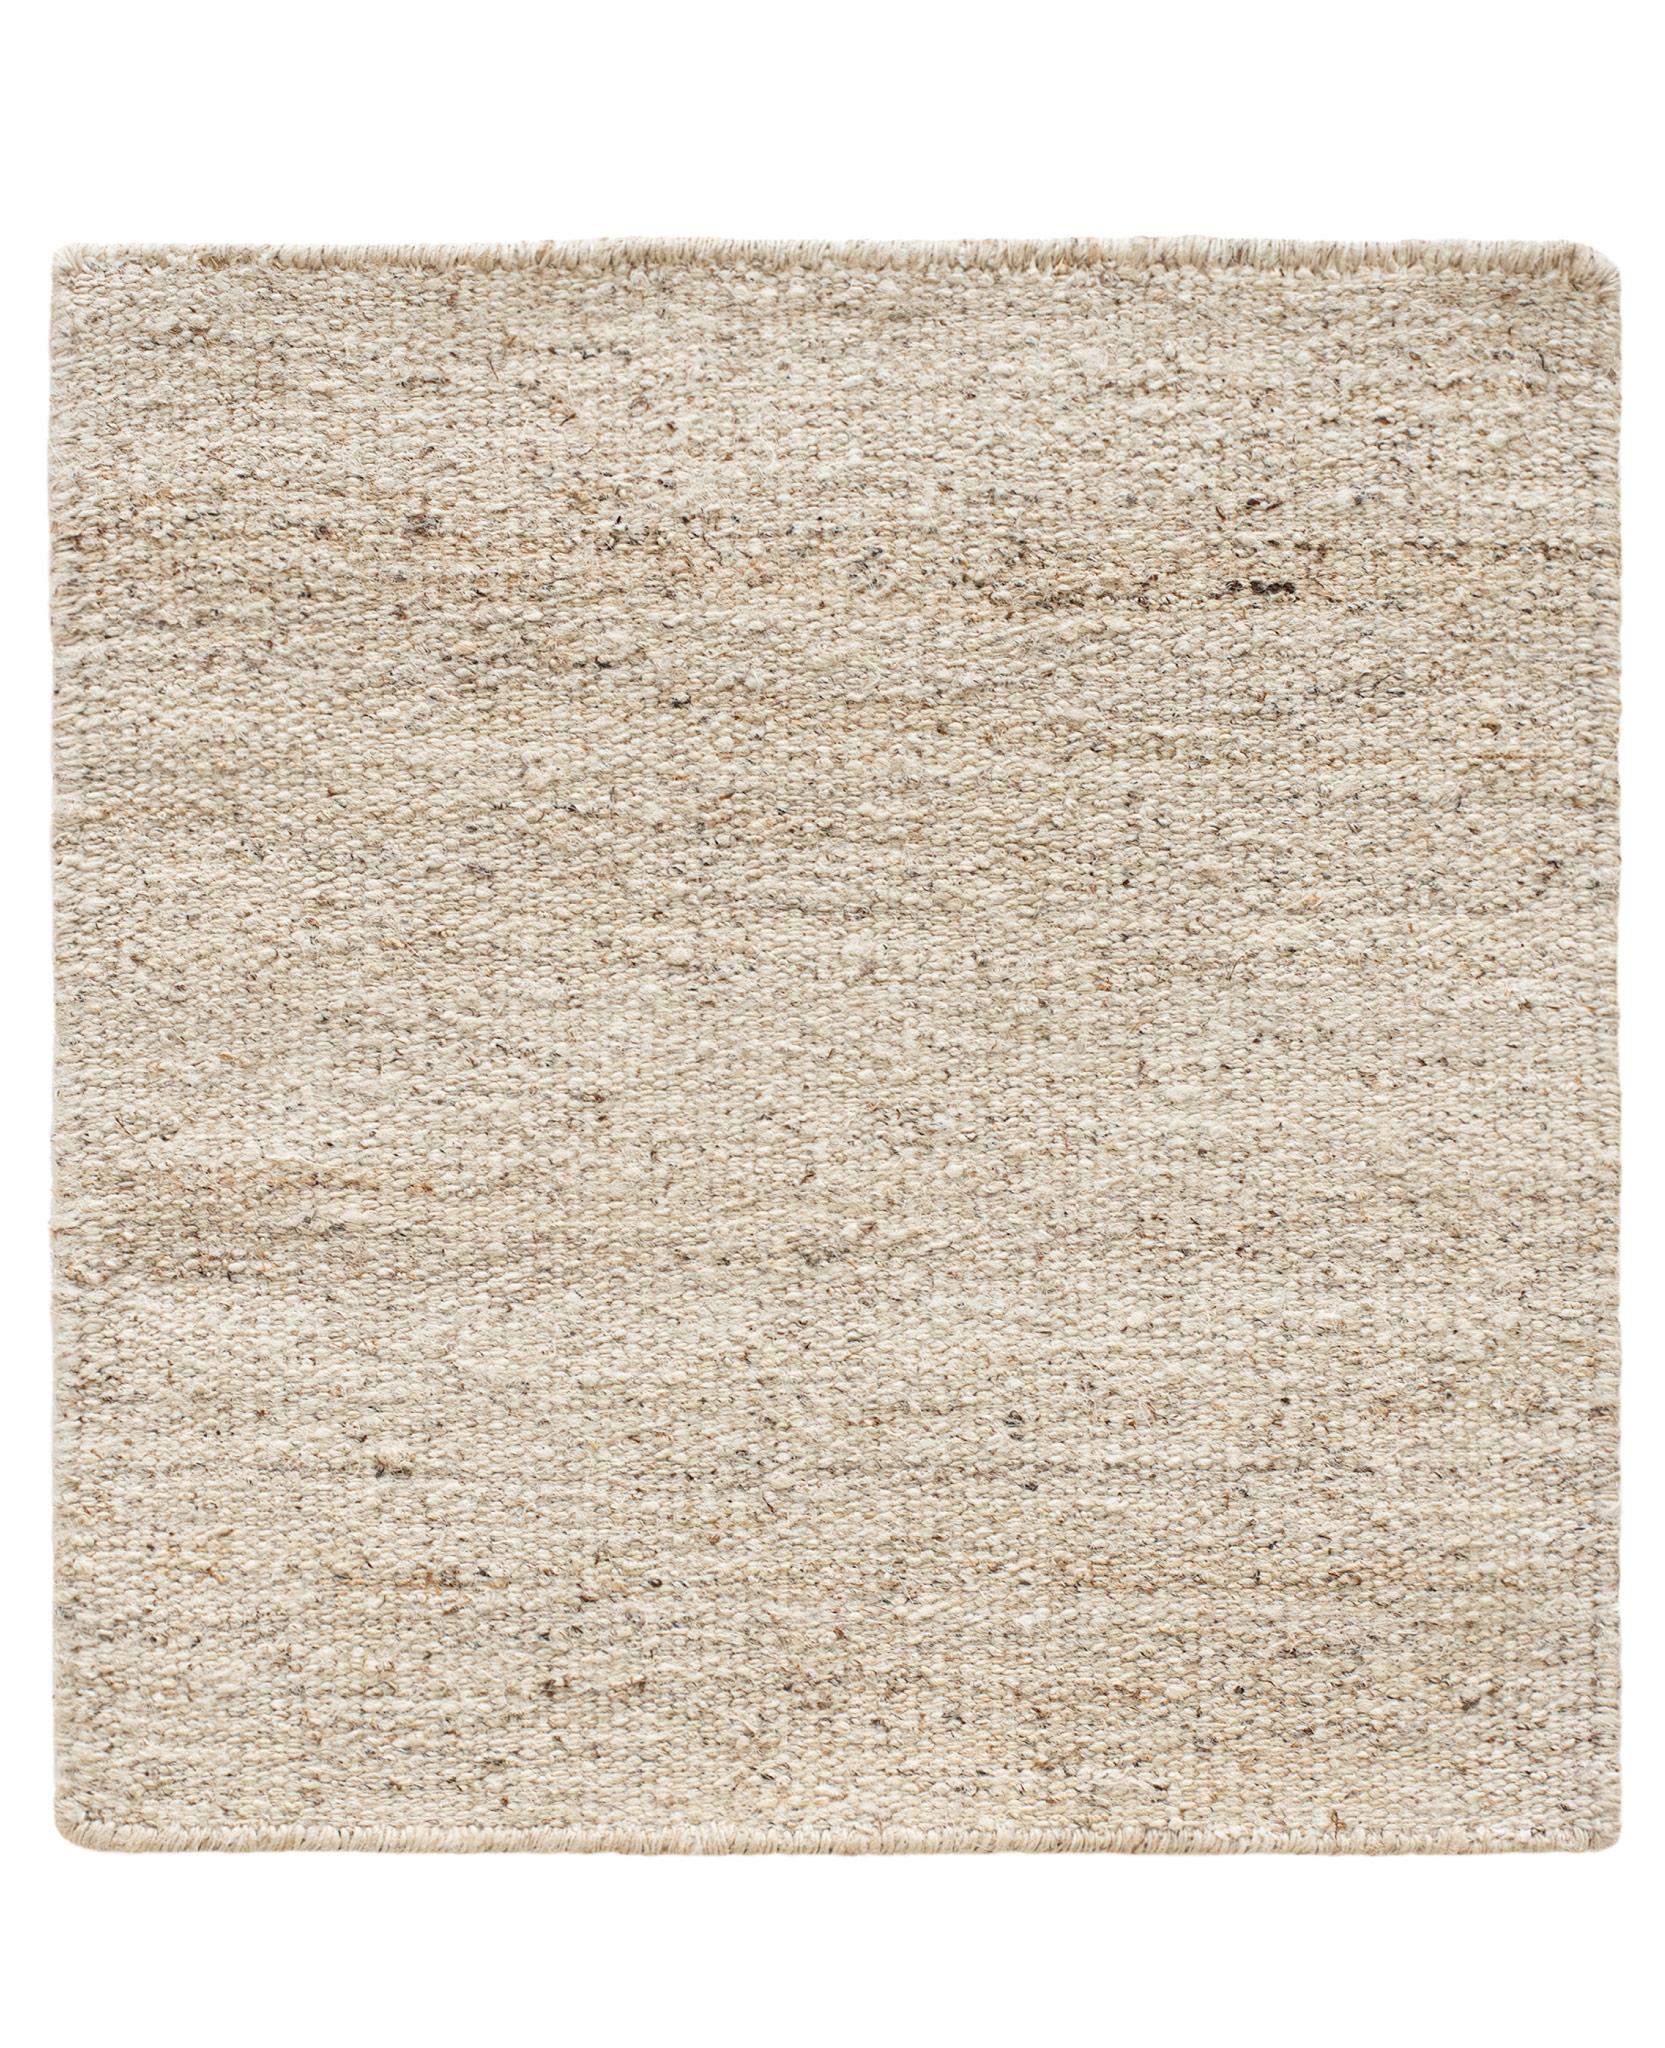 COLOUR: Natural
MATERIAL: 100% Nettle
QUALITY: Flatweave
ORIGIN: Hand-woven rug produced in Nepal
 
RUG SIZE DISPLAYED: 200cm x 300cm

Part of the Knots Rugs Textures collection, Dhurrie is a flatweave rug produced in Nepal, made using 100% Nettle